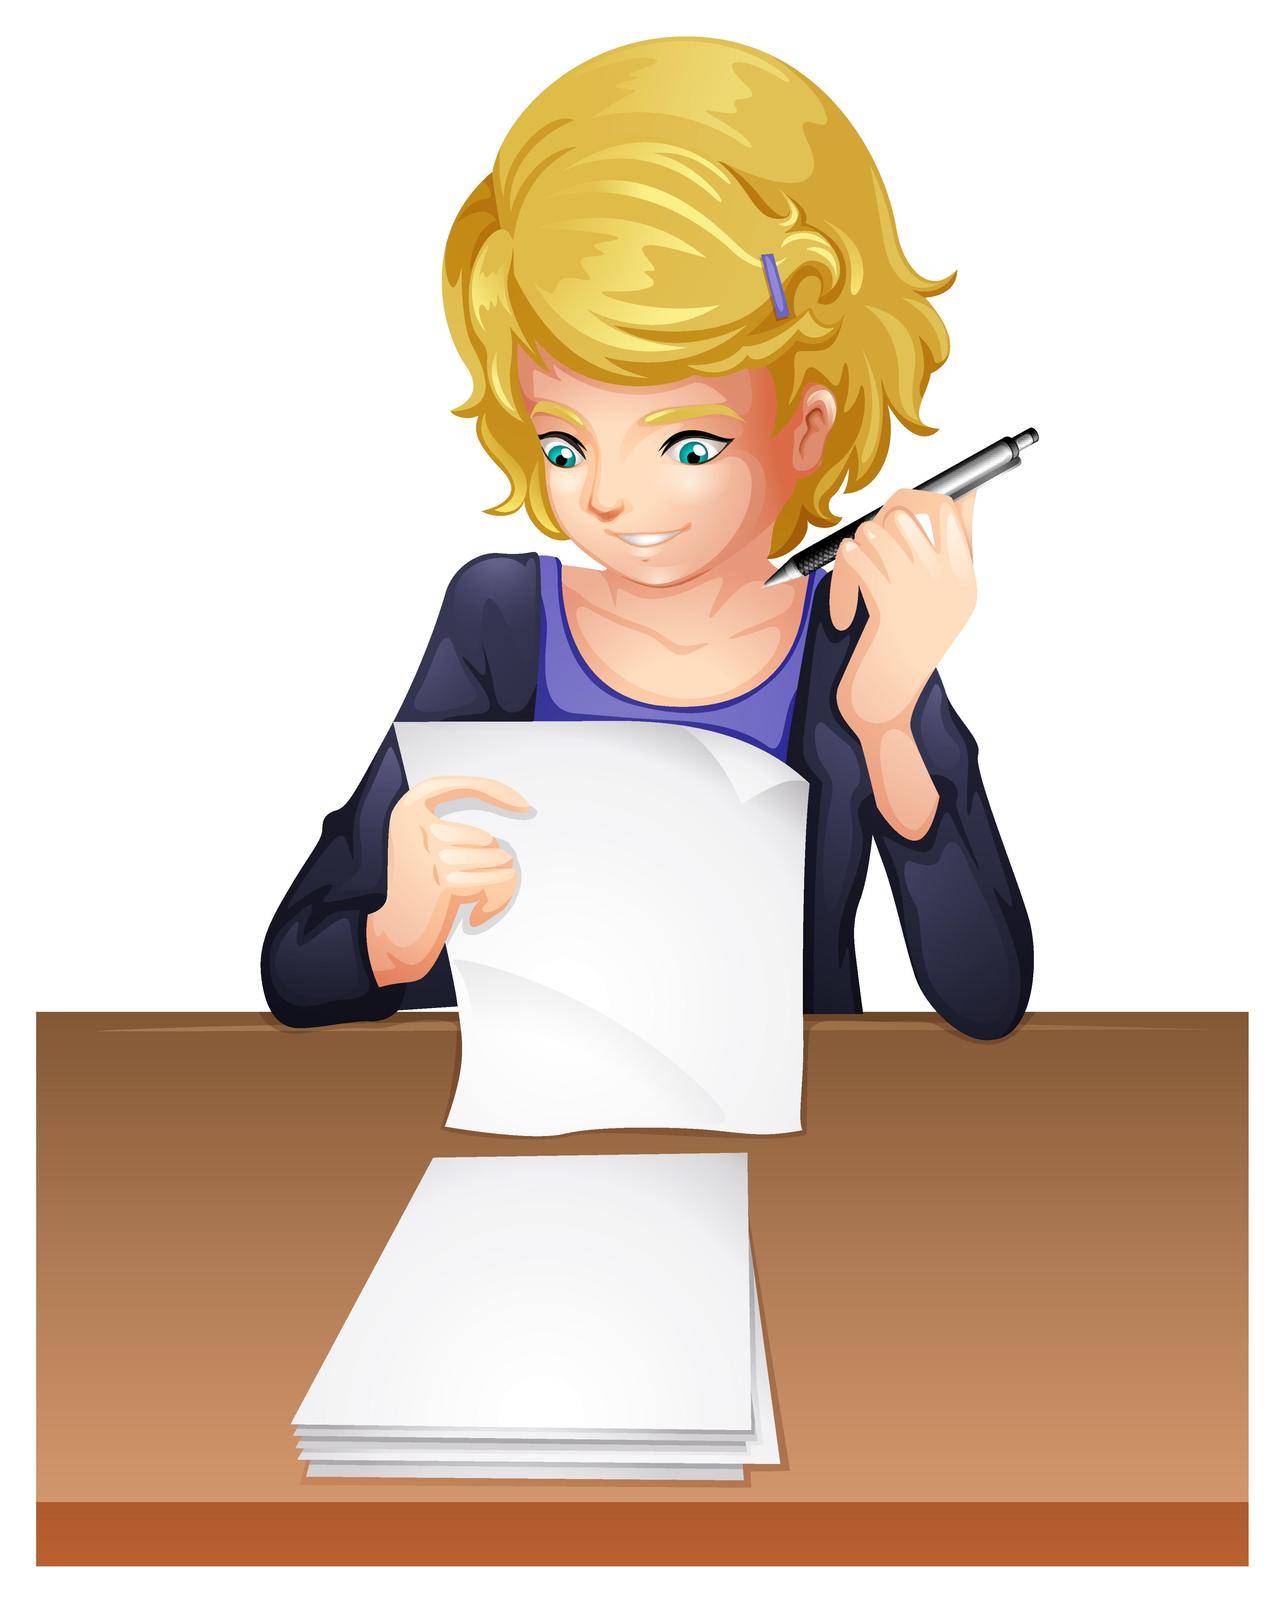 Illustration of a woman taking an exam on a white background